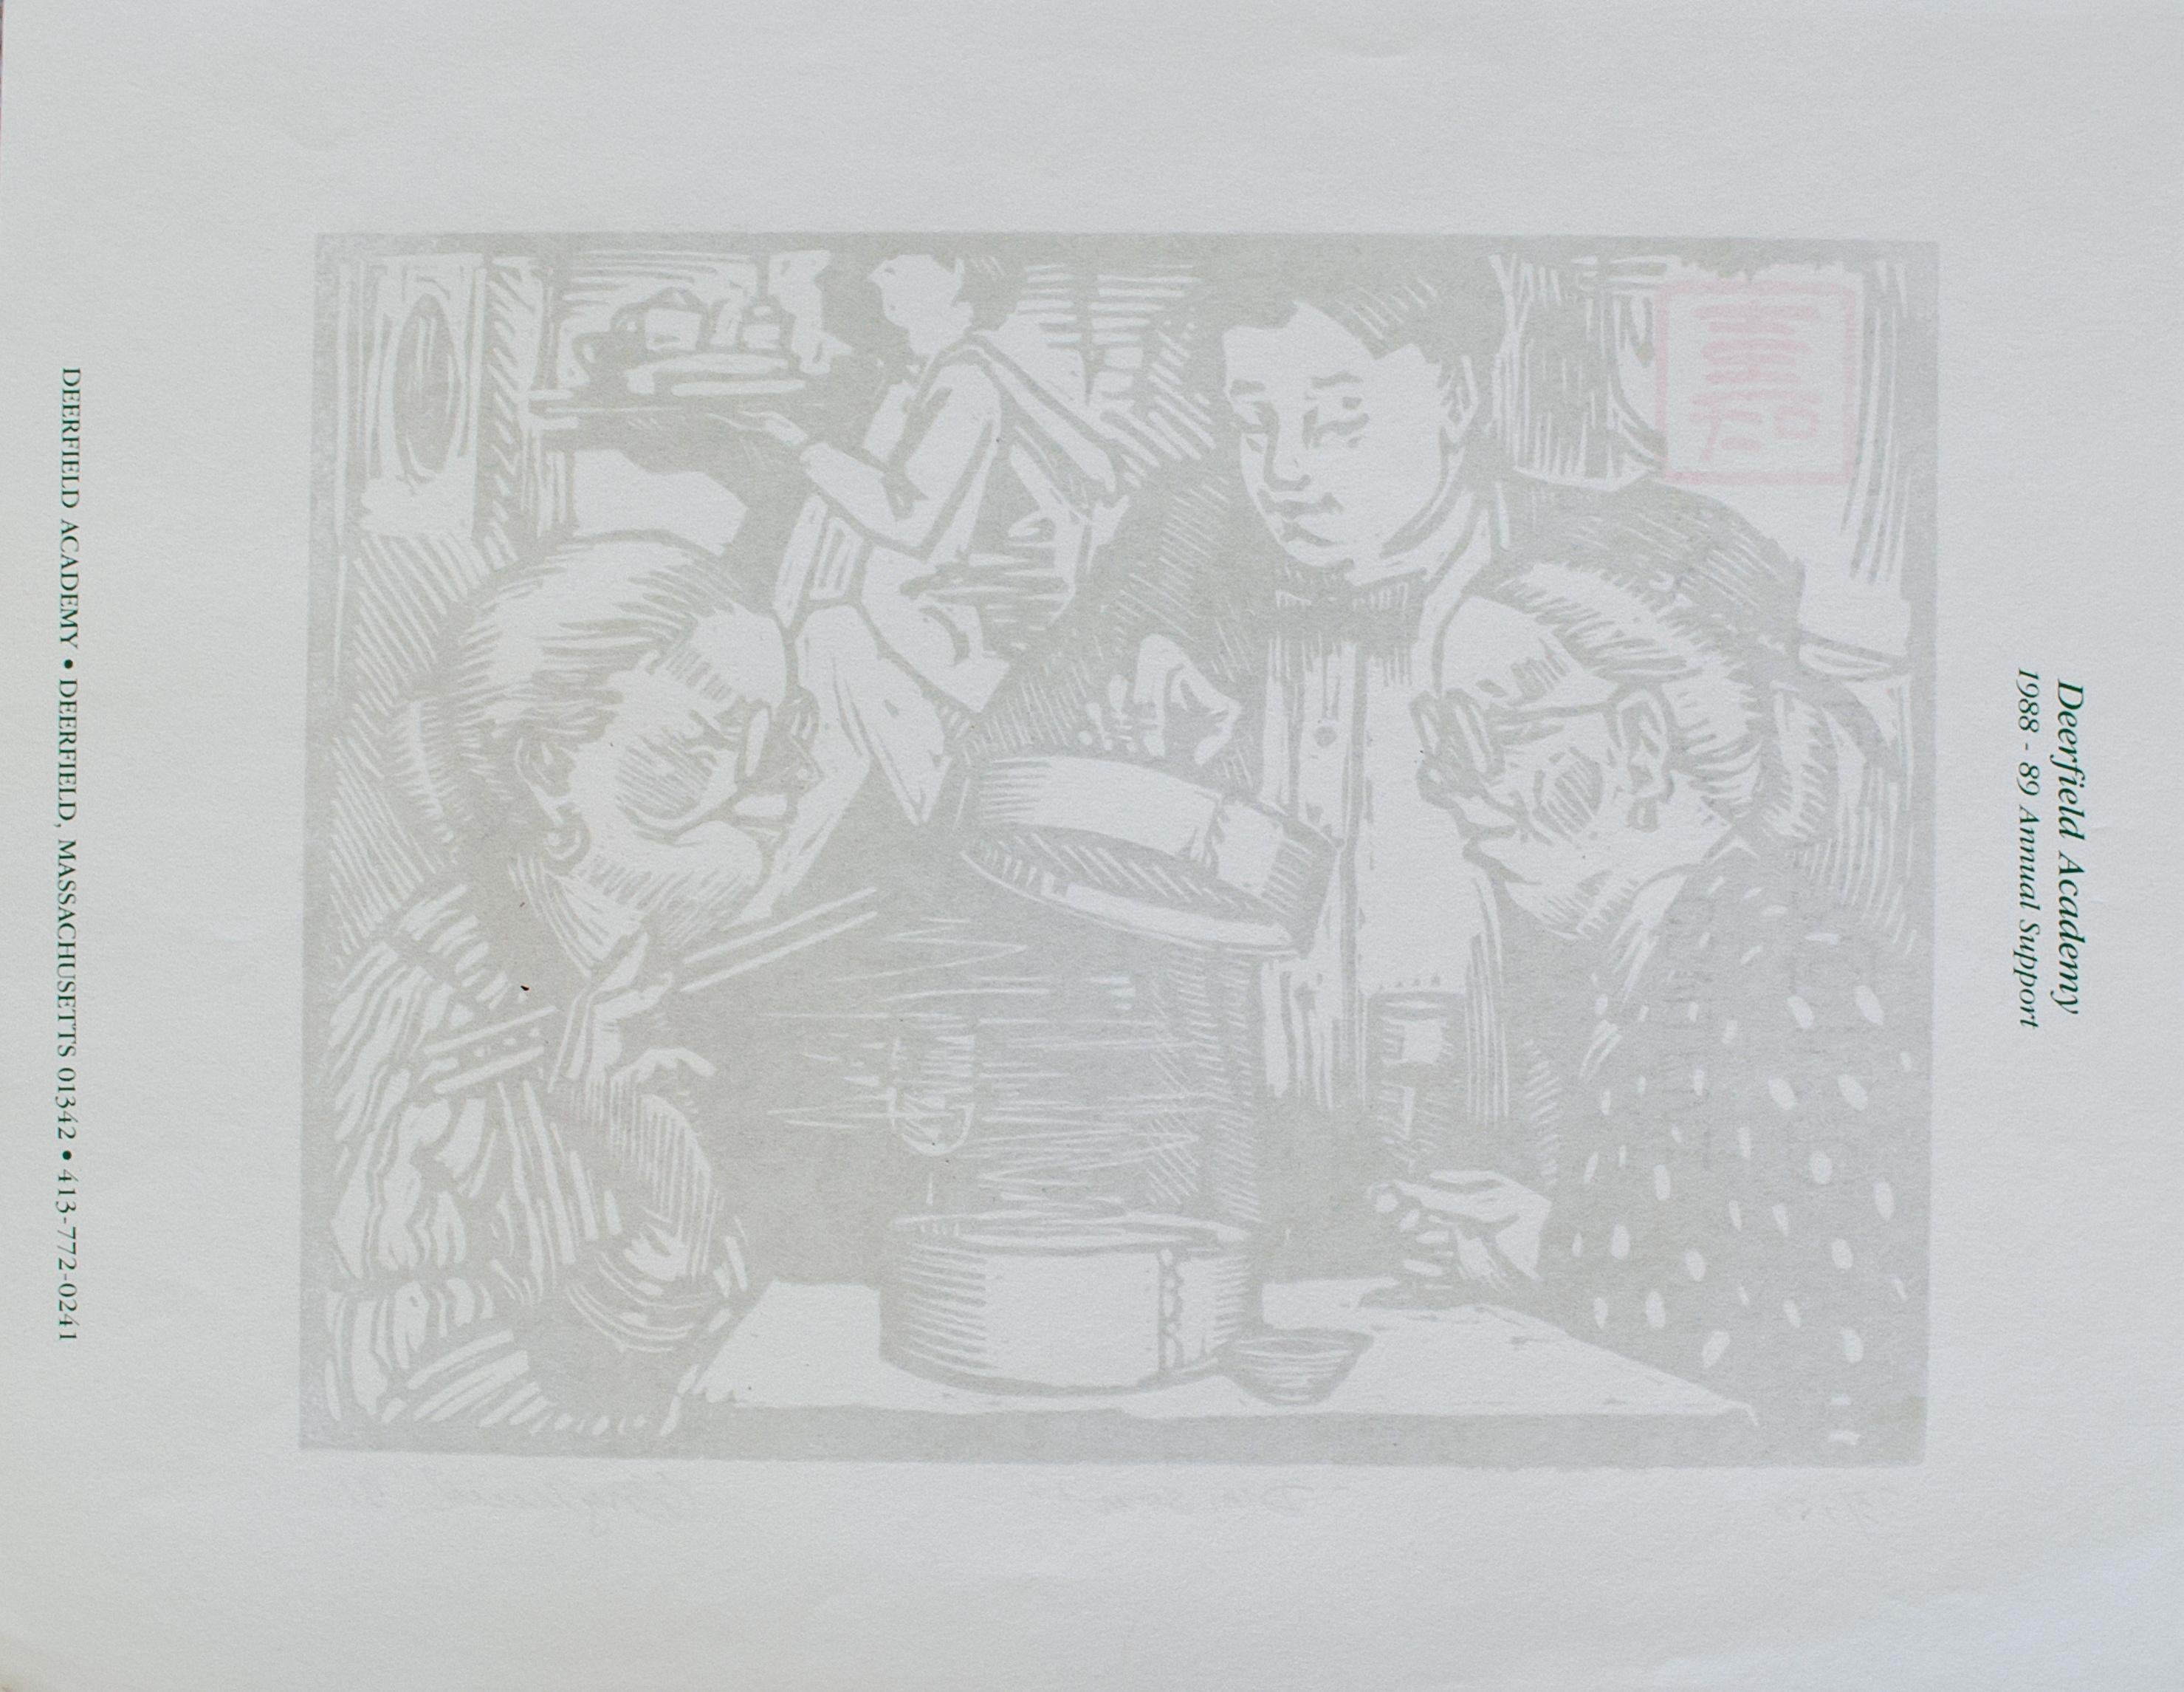 Tim Engelland (American, 1950-2012)
Dim Sum!, 1991
Woodcut 
8 1/2 x 11 in.
Signed dated lower right: T. Engelland, '91
Titled lower middle: Dim Sum!
Numbered lower left: 73/150

A lifelong artist, Engelland specialized in oil portraits and